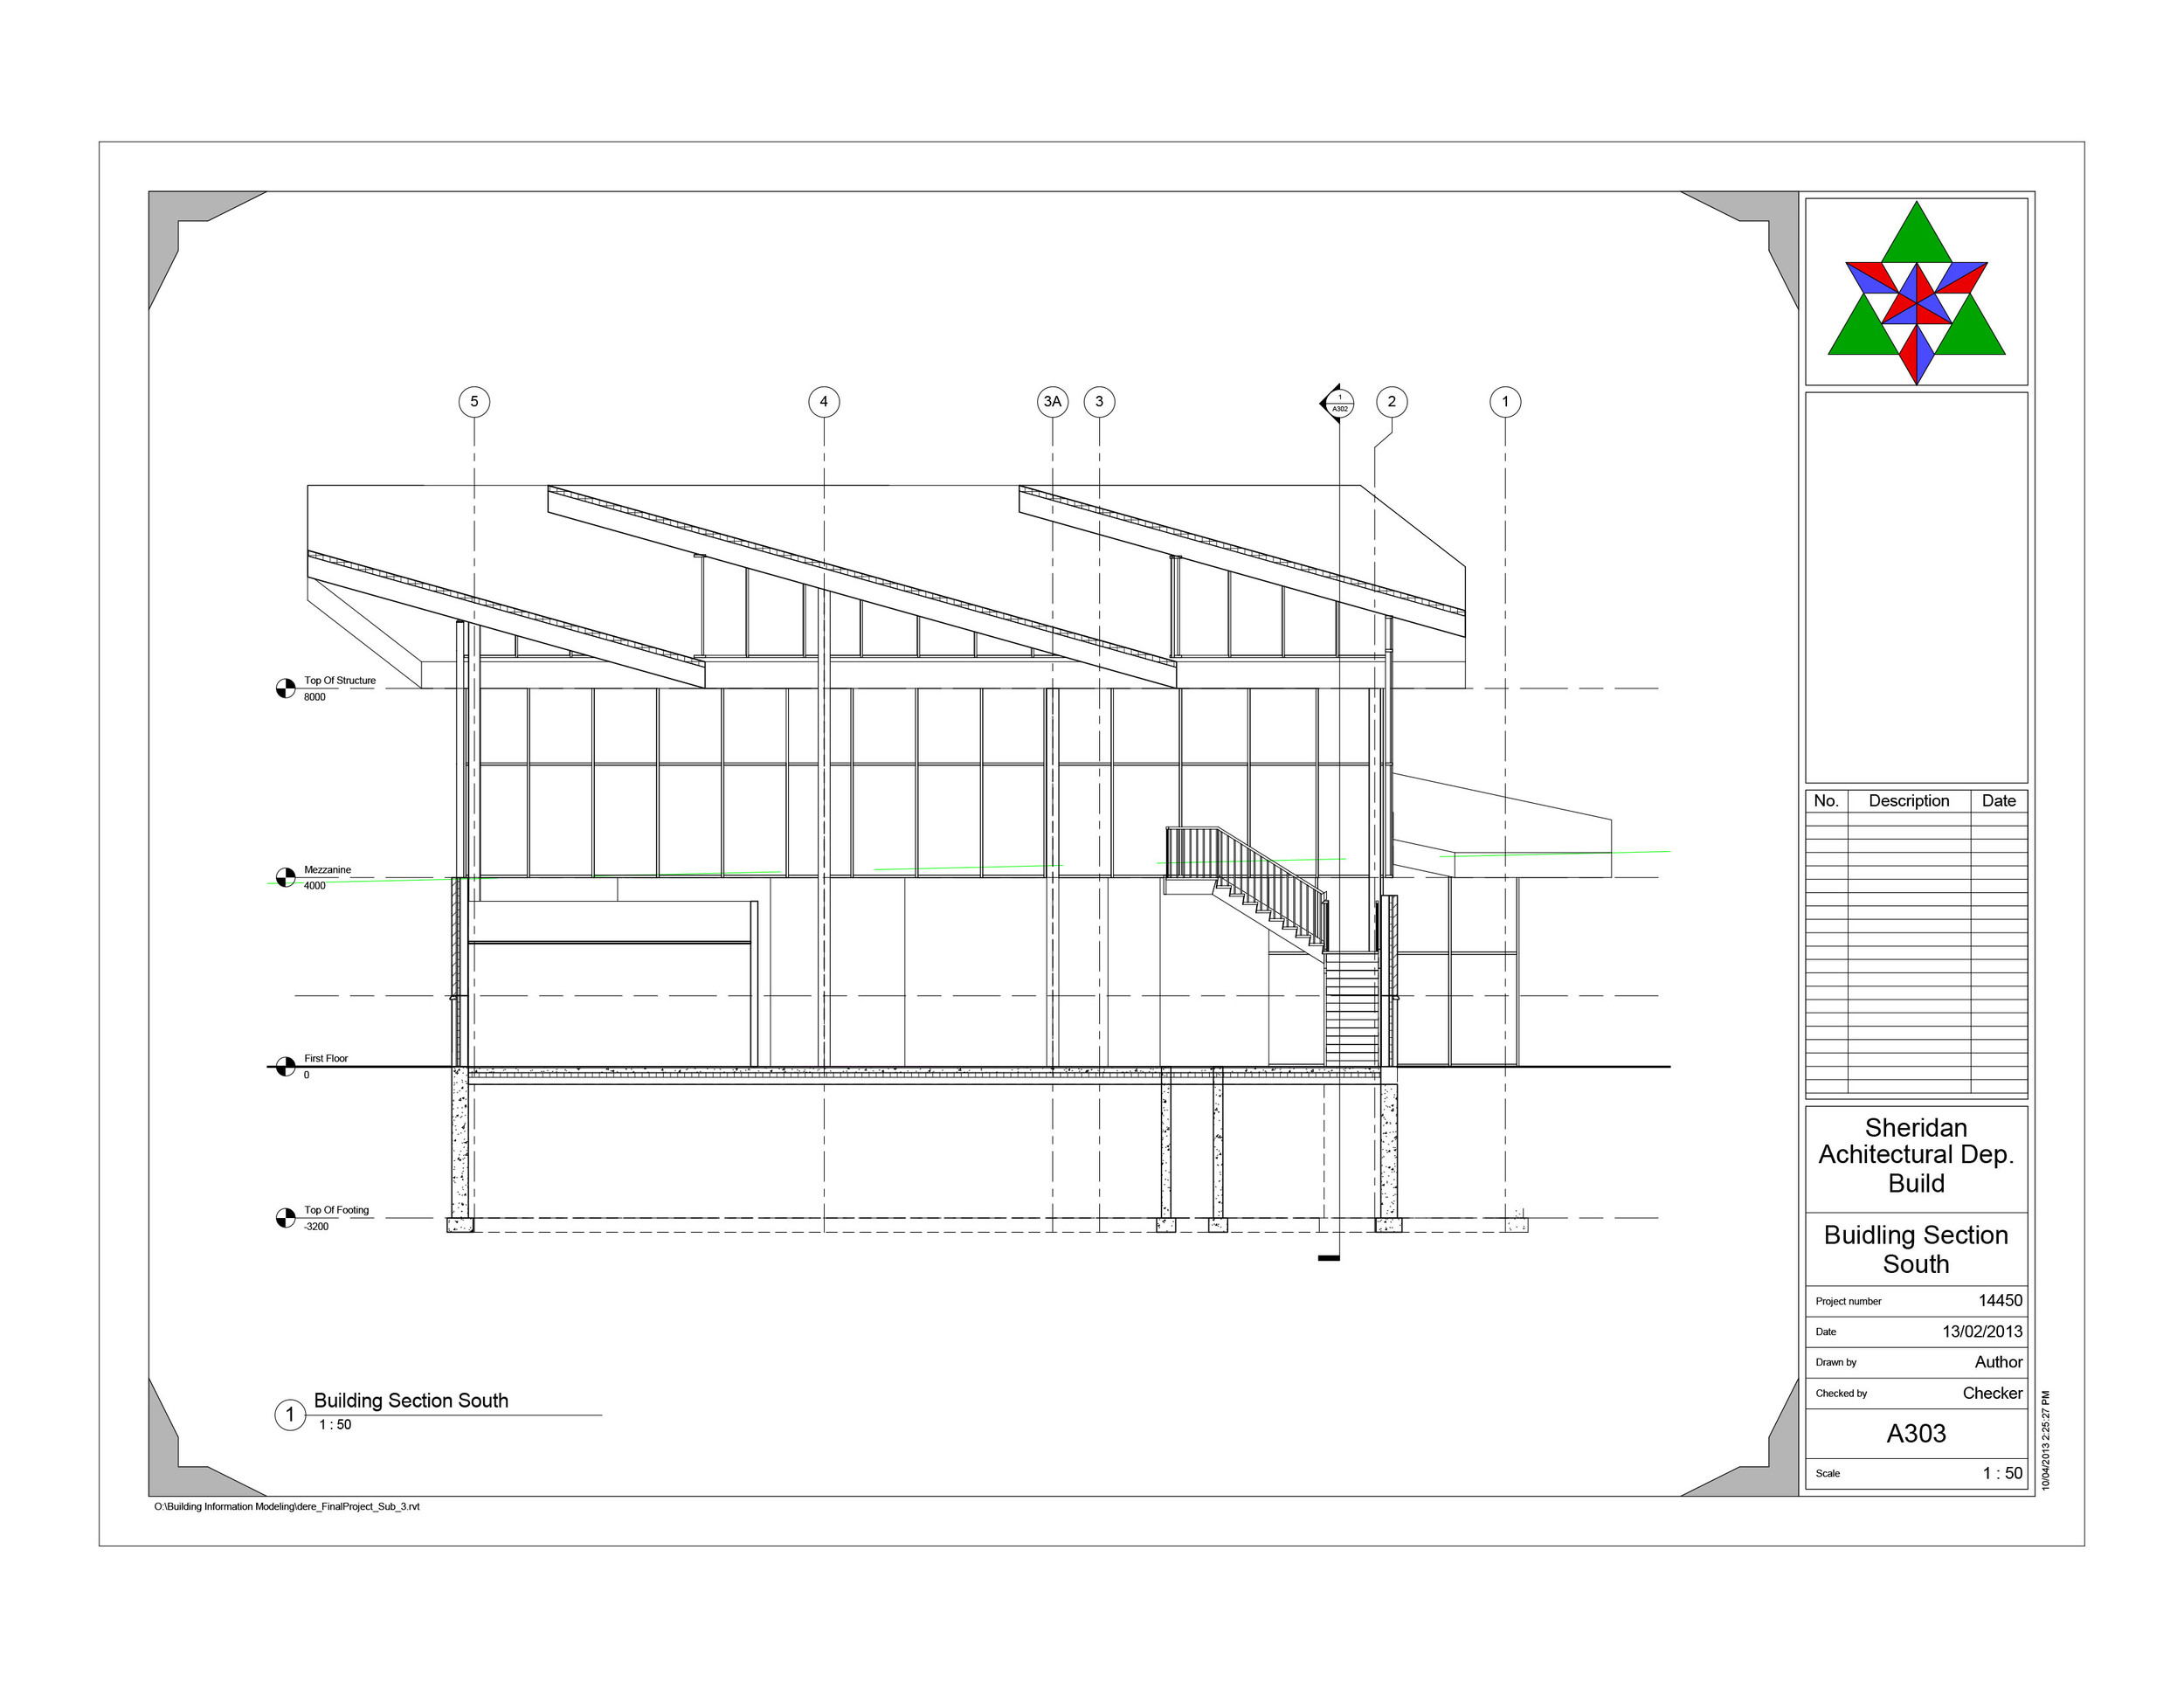 dere_FinalProject  - Sheet - A303 - Buidling Section South.jpg